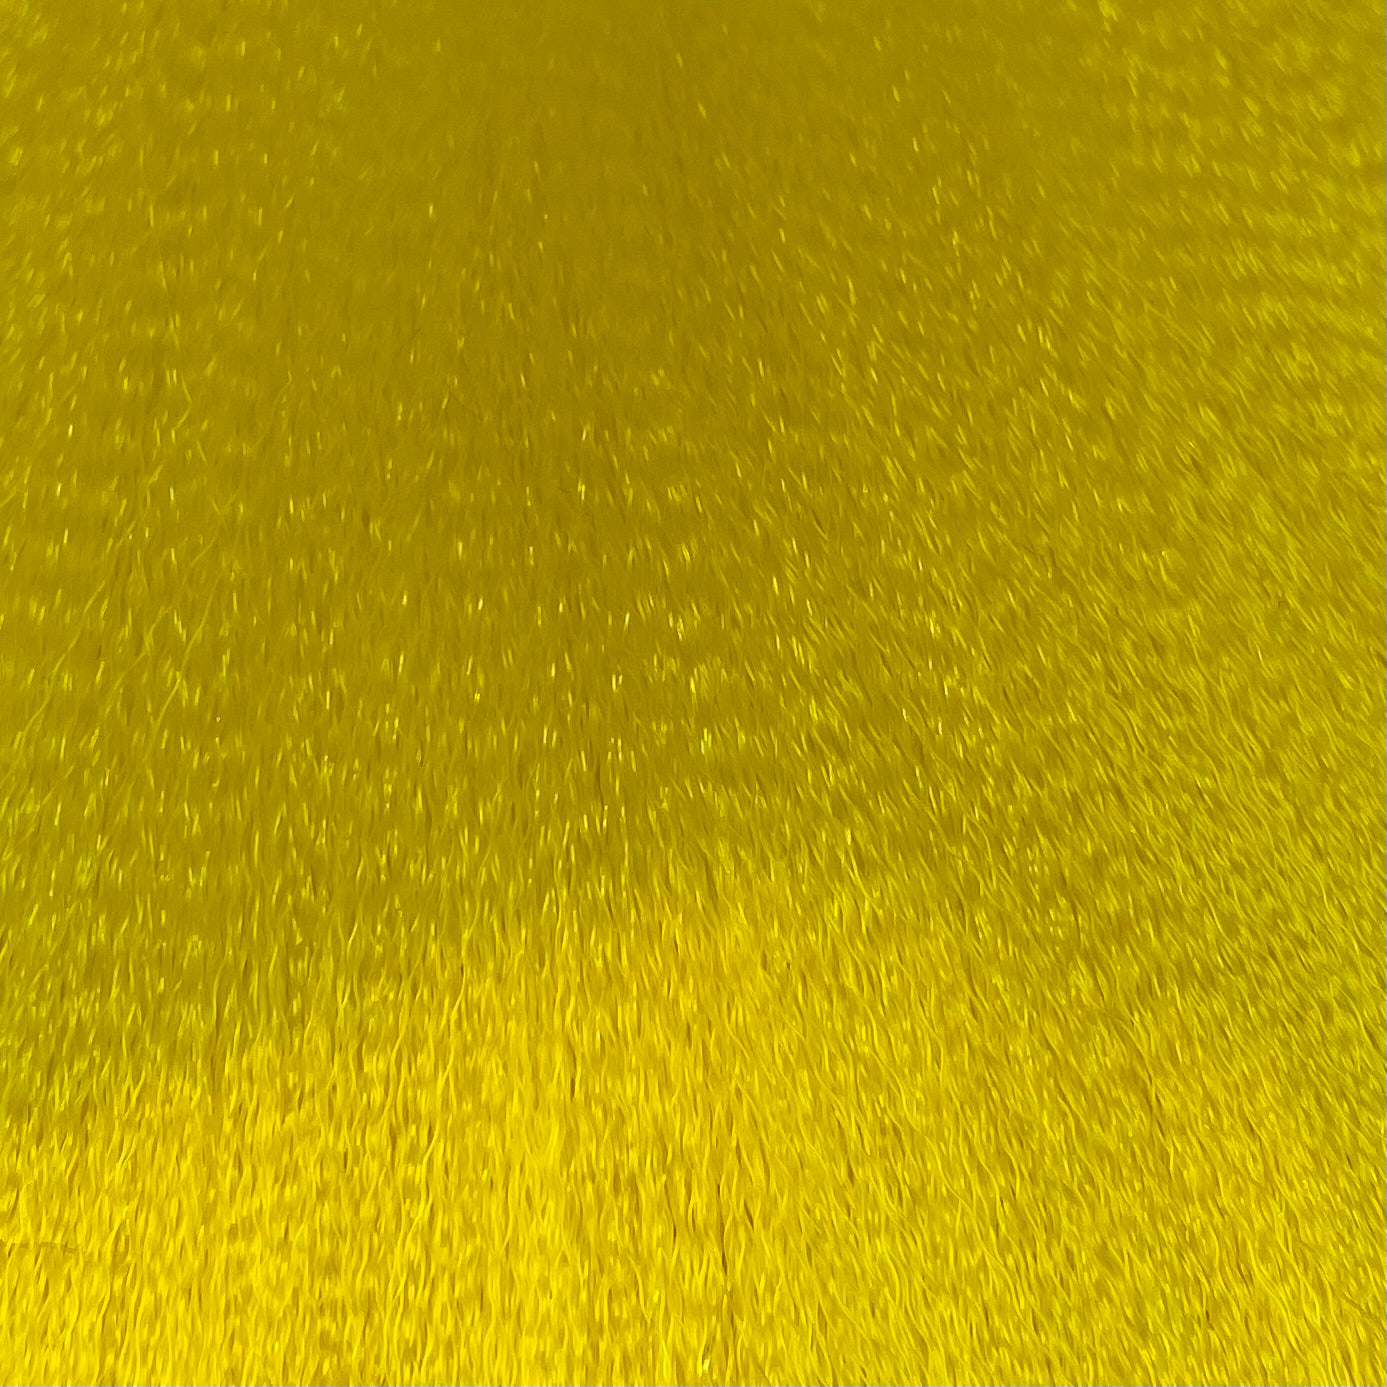 12" CRIMPED NYLON TAIL MATERIAL